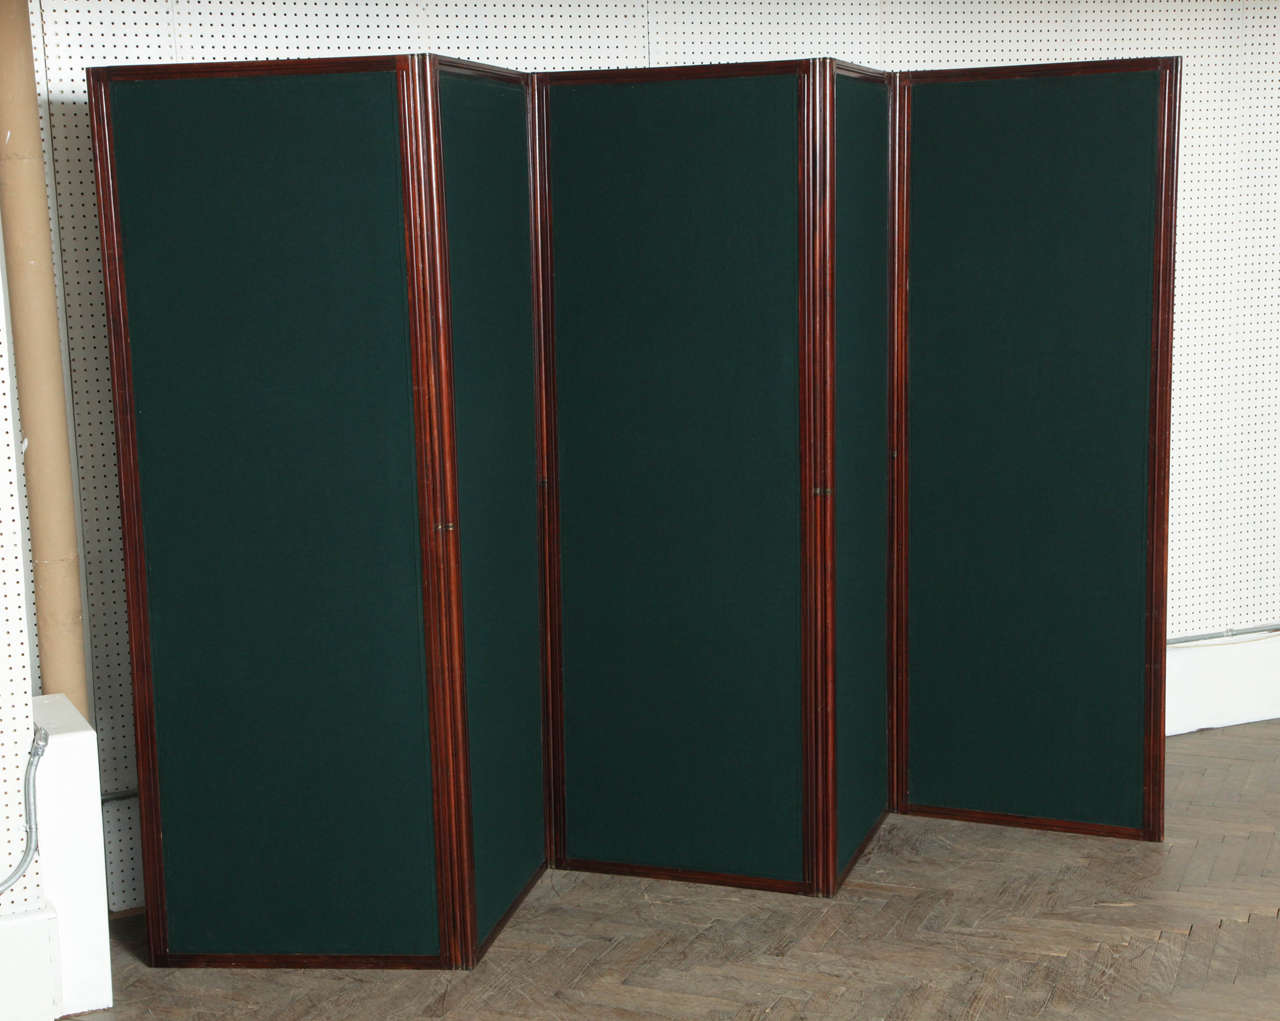 This is an antique screen or divider made of mahogany and inset with fabric. These screens were historically used to block off or hide areas of the room with servers or dining prep during the victorian era. 

MEASUREMENTS BELOW PER PANEL